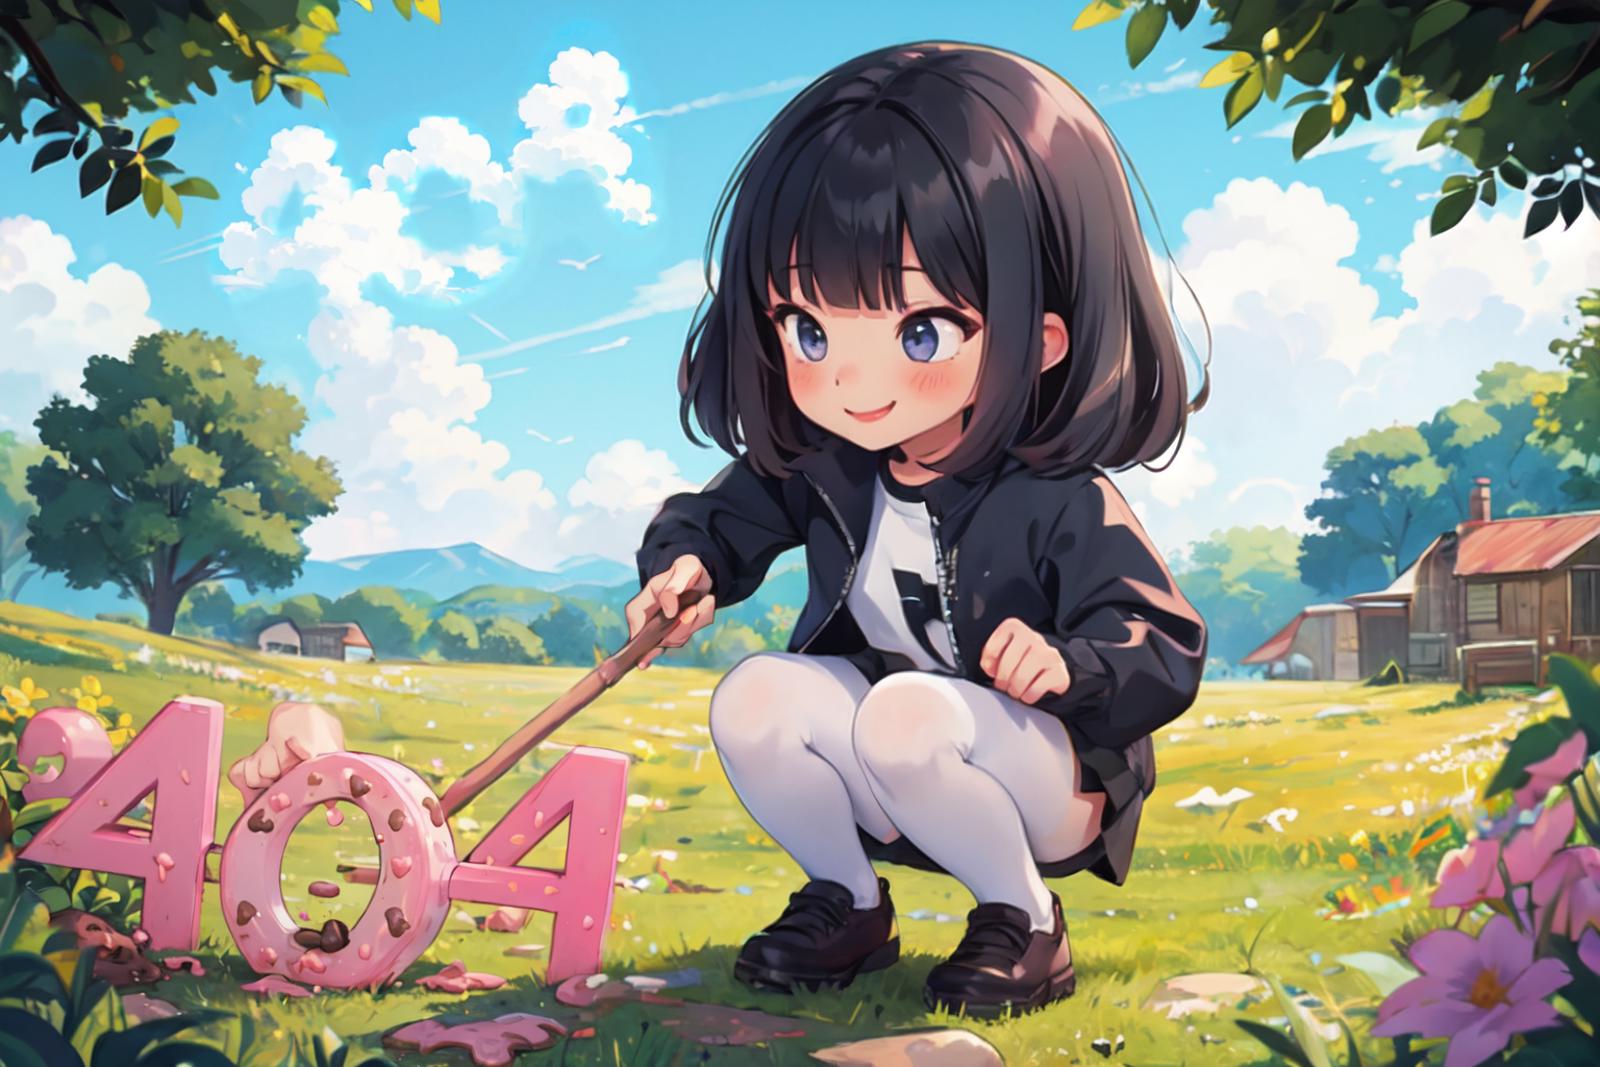 A young girl in a black jacket and white t-shirt is sitting on the grass.